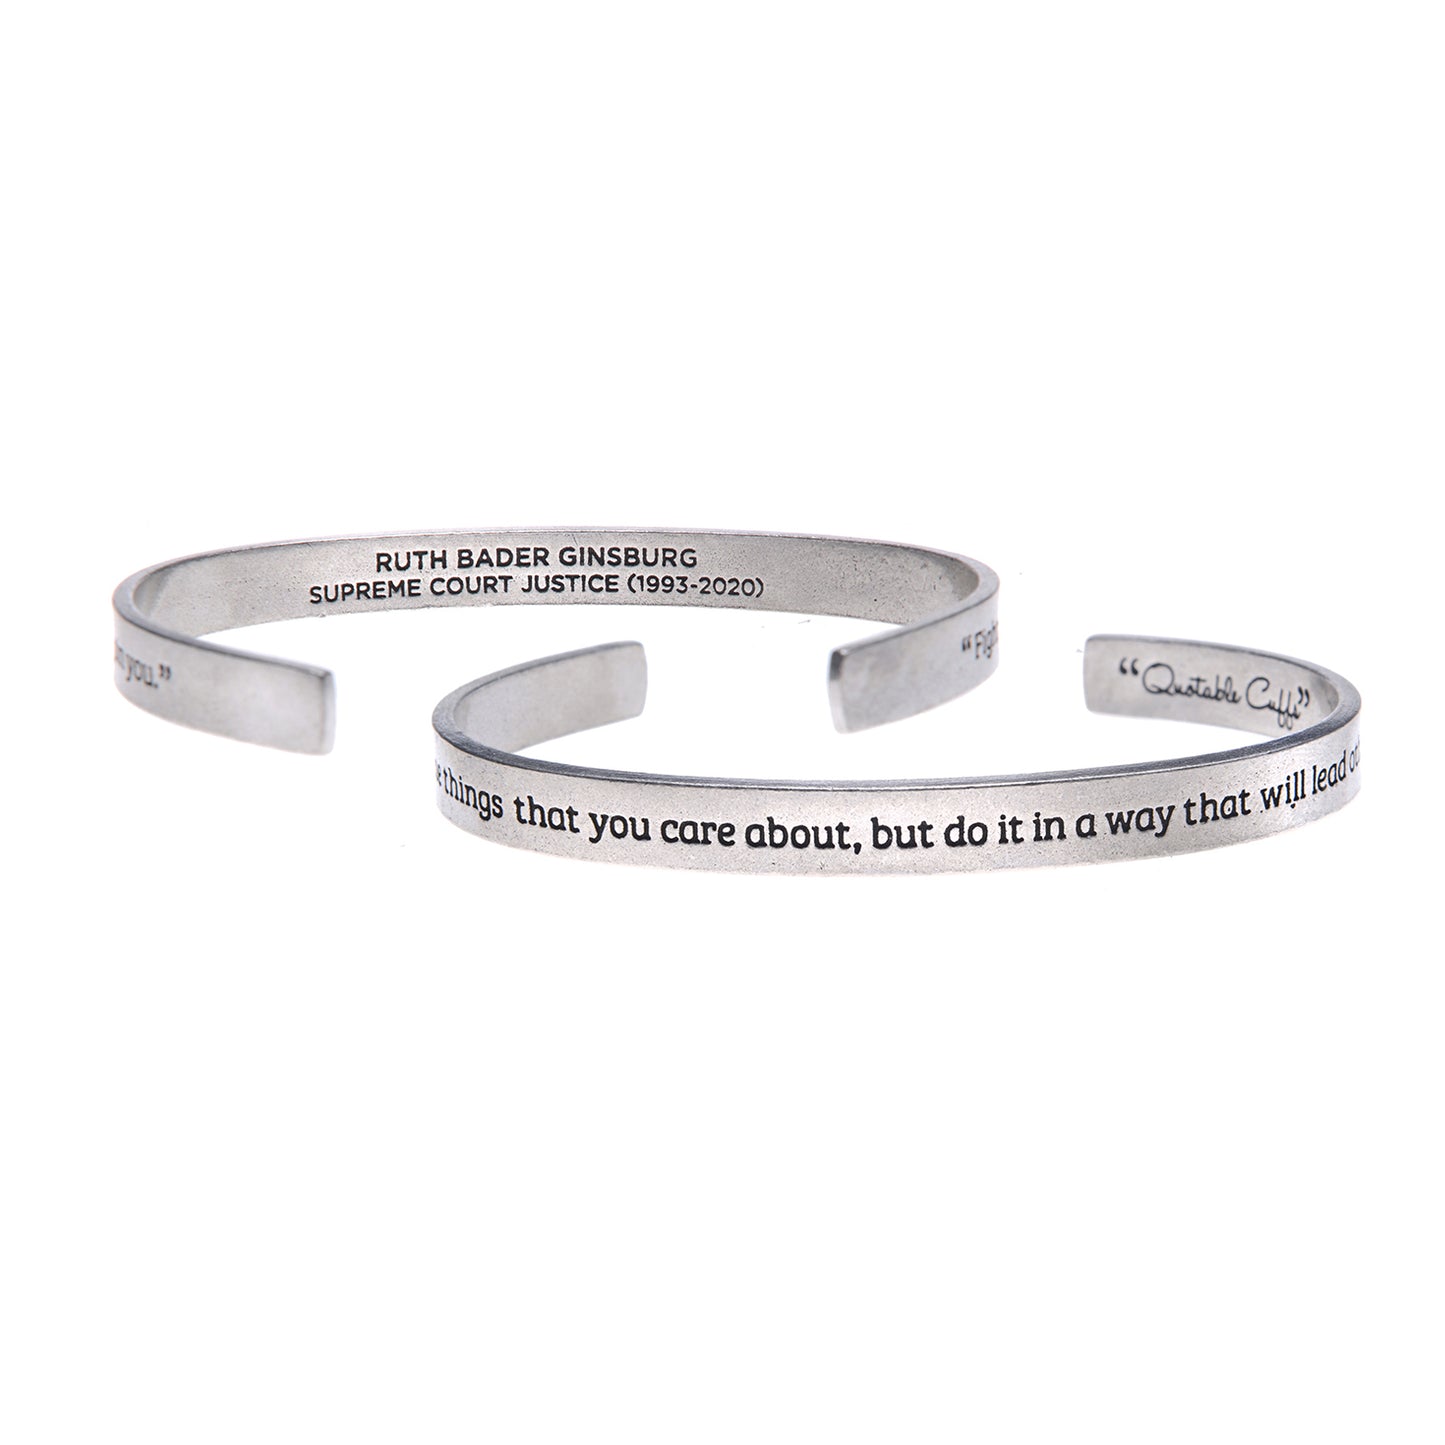 Fight For Things You Care About Quotable Cuff Bracelet - Ruth Bader Ginsburg